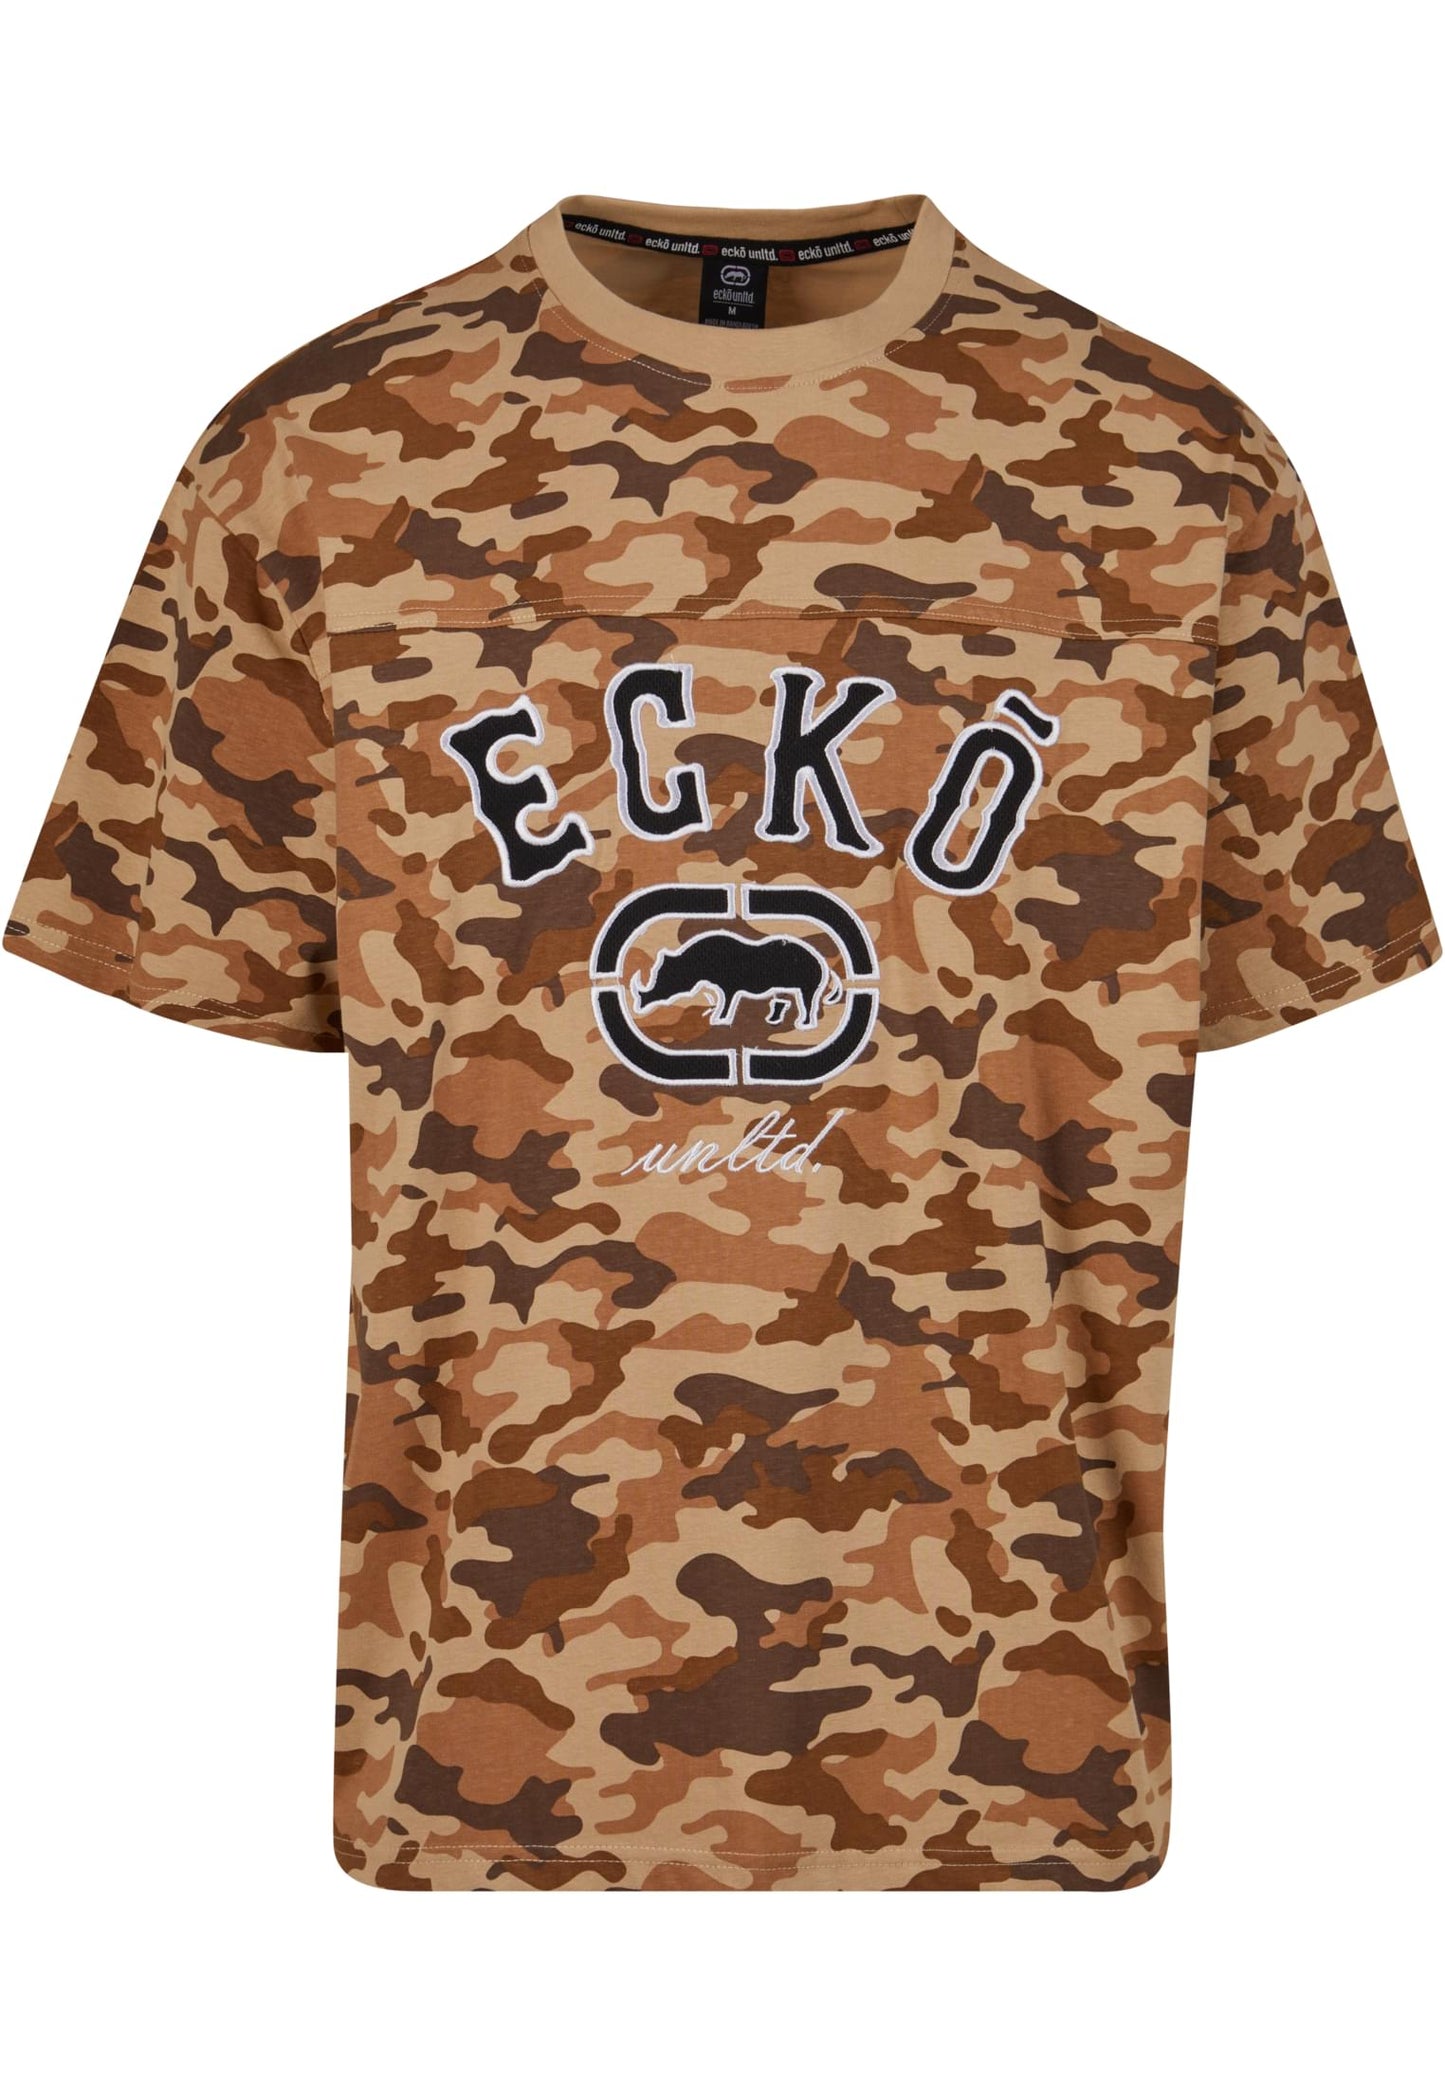 Ecko Unltd. Embroidery T-Shirt camouflage/camel/brown